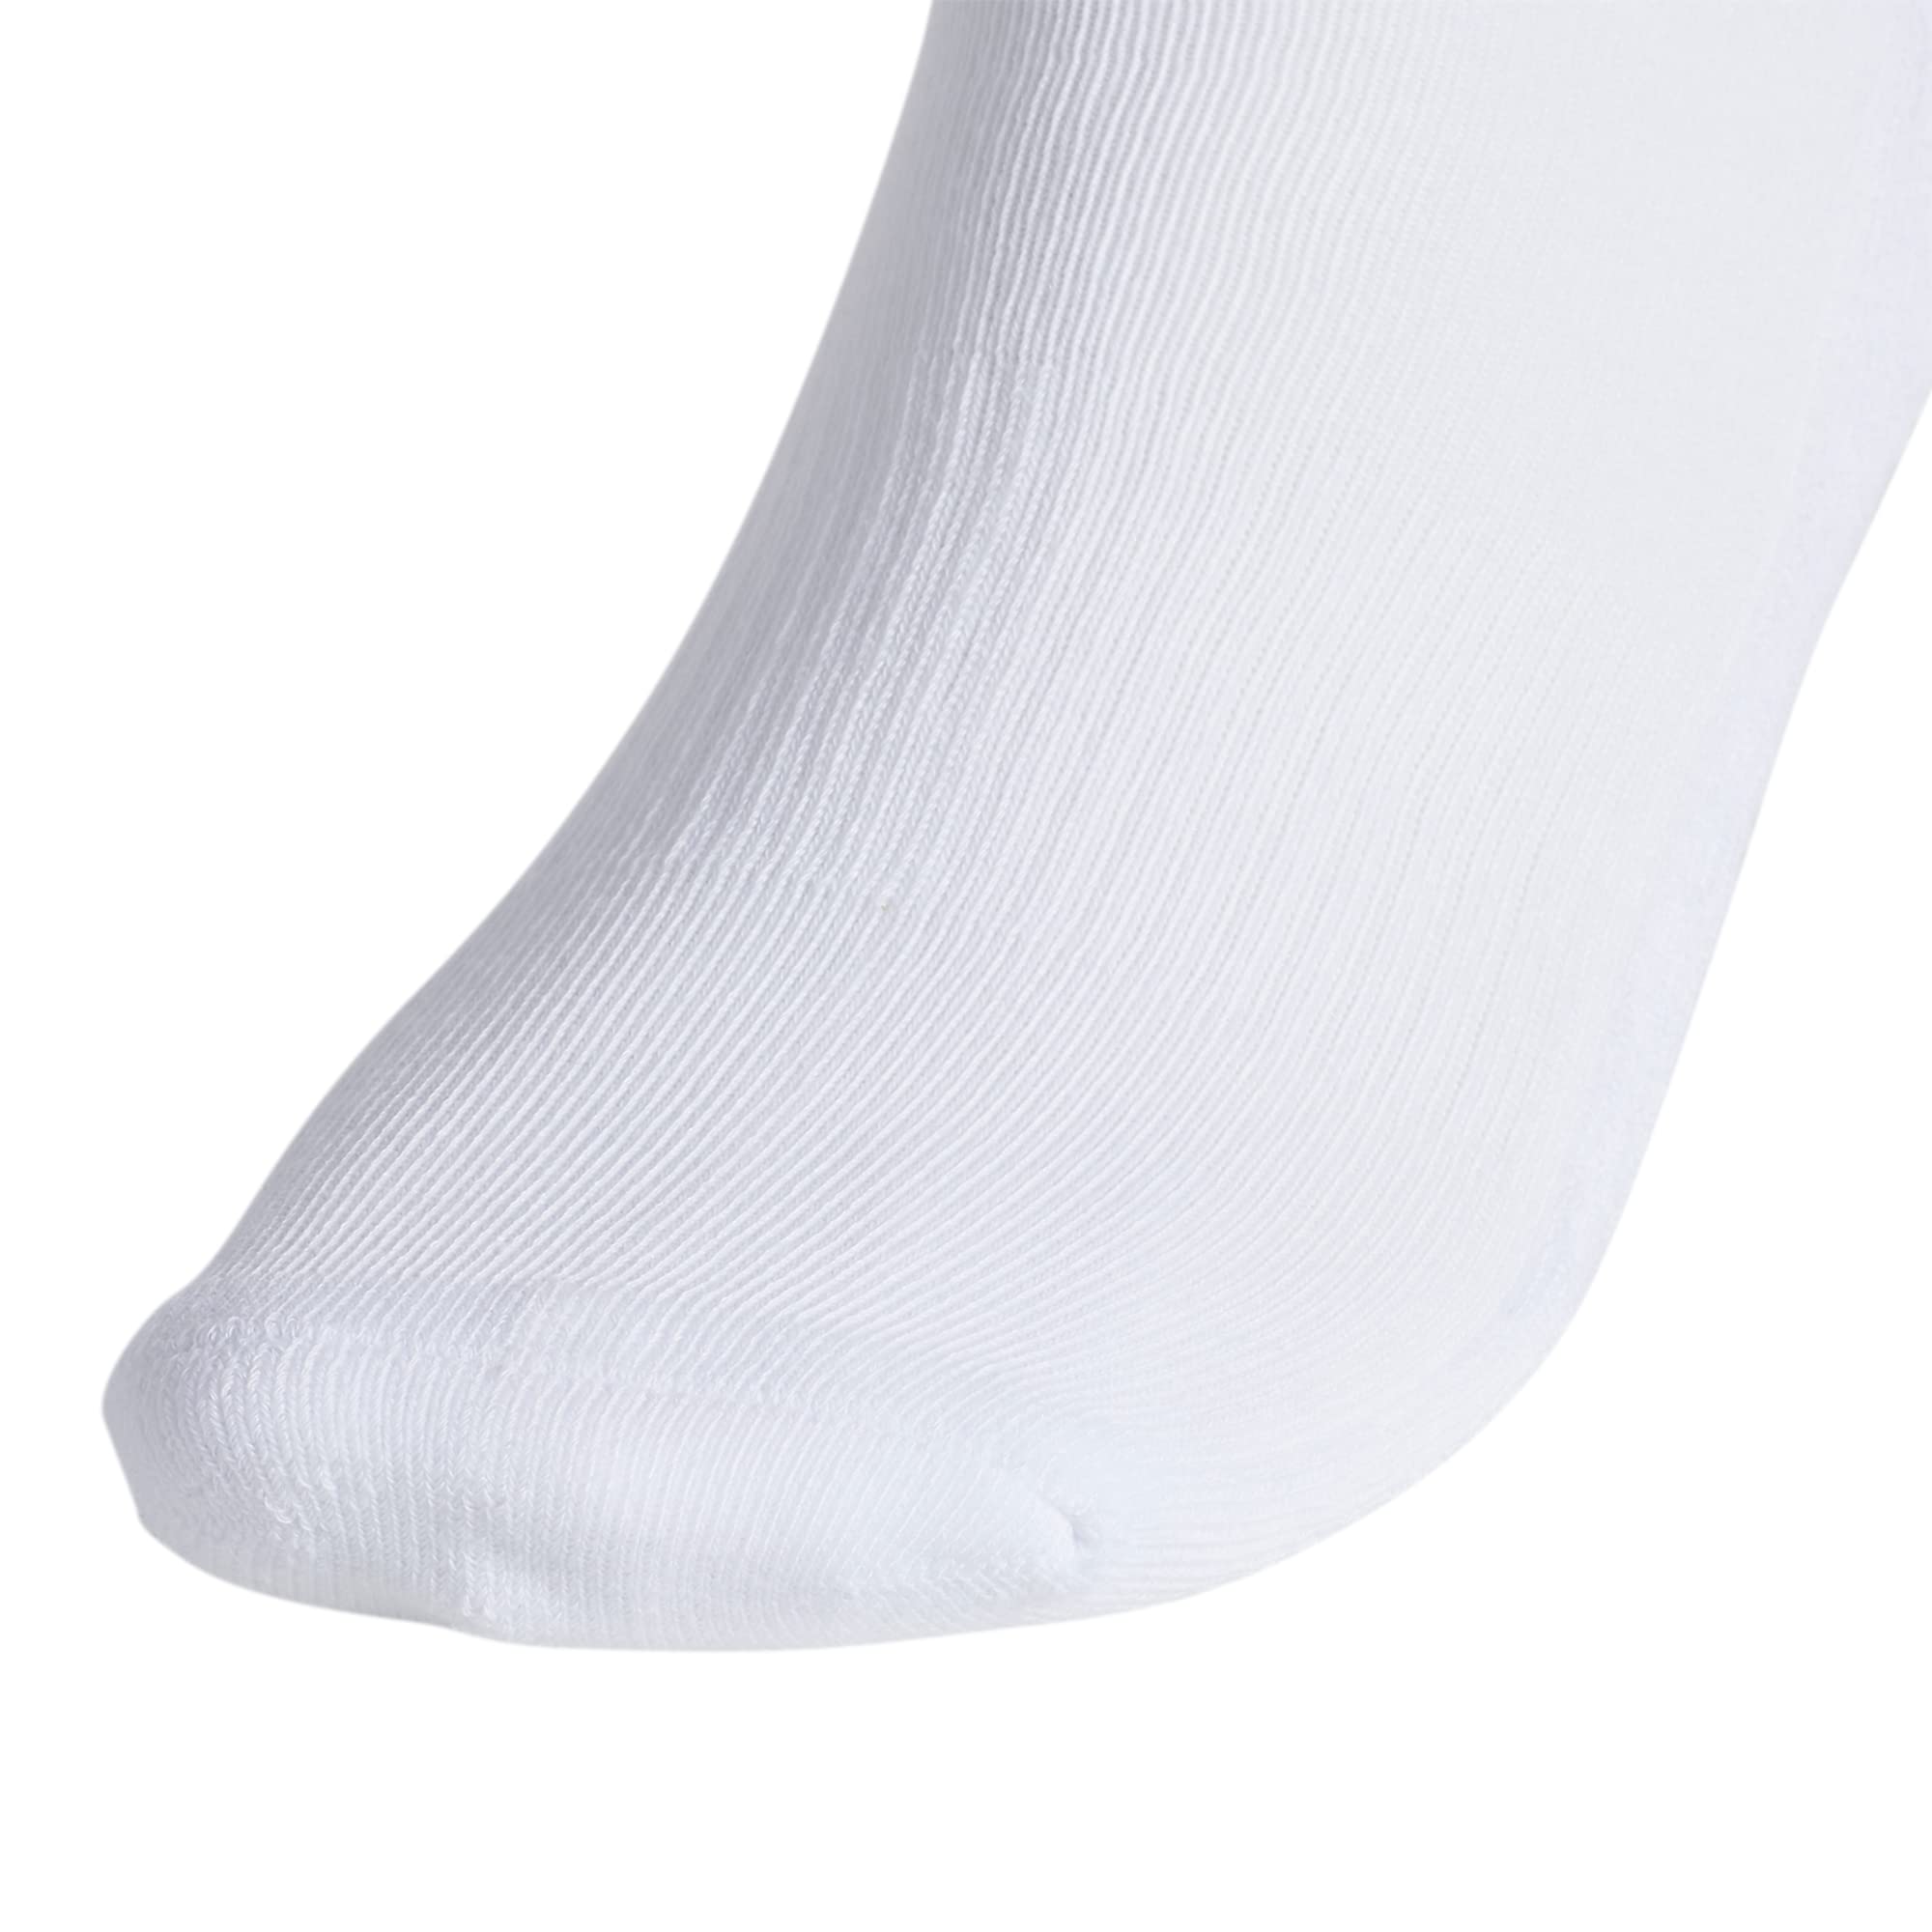 adidas Men's Athletic Cushioned Quarter Socks (with Arch Compression for a Secure Fit (6-Pair)